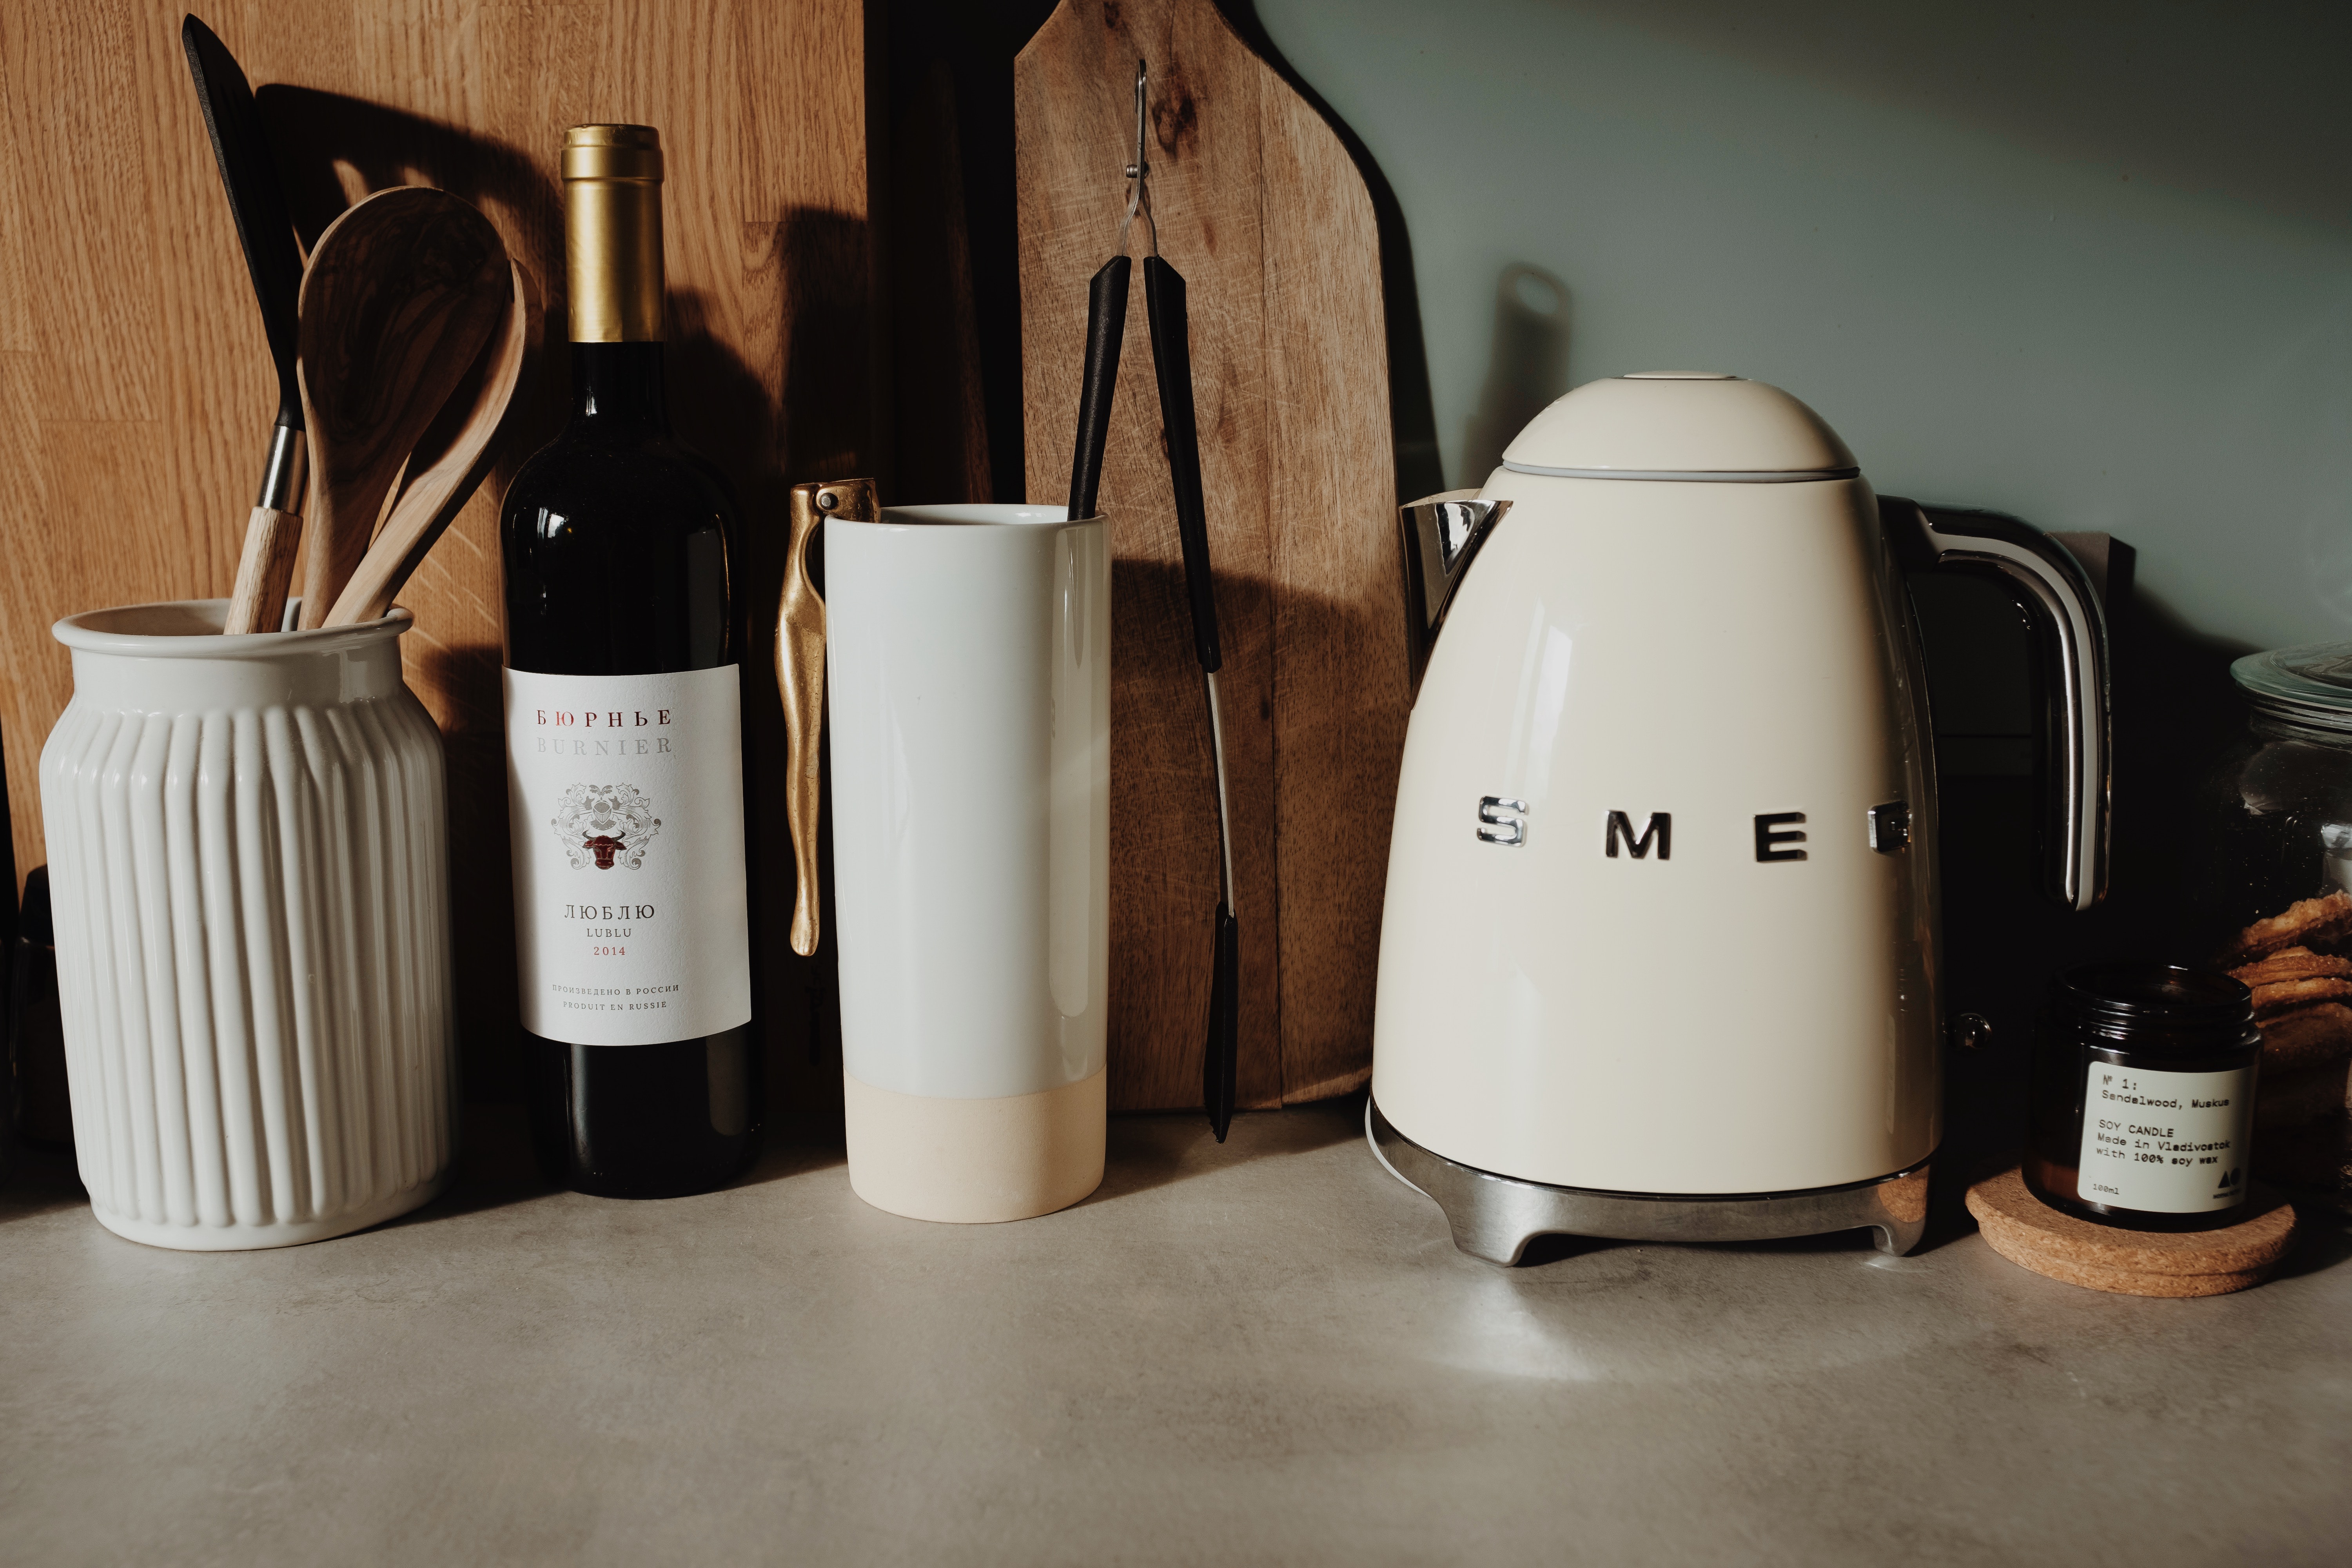 The Smeg Electric Kettle Is 21% Off for Prime Big Deal Days